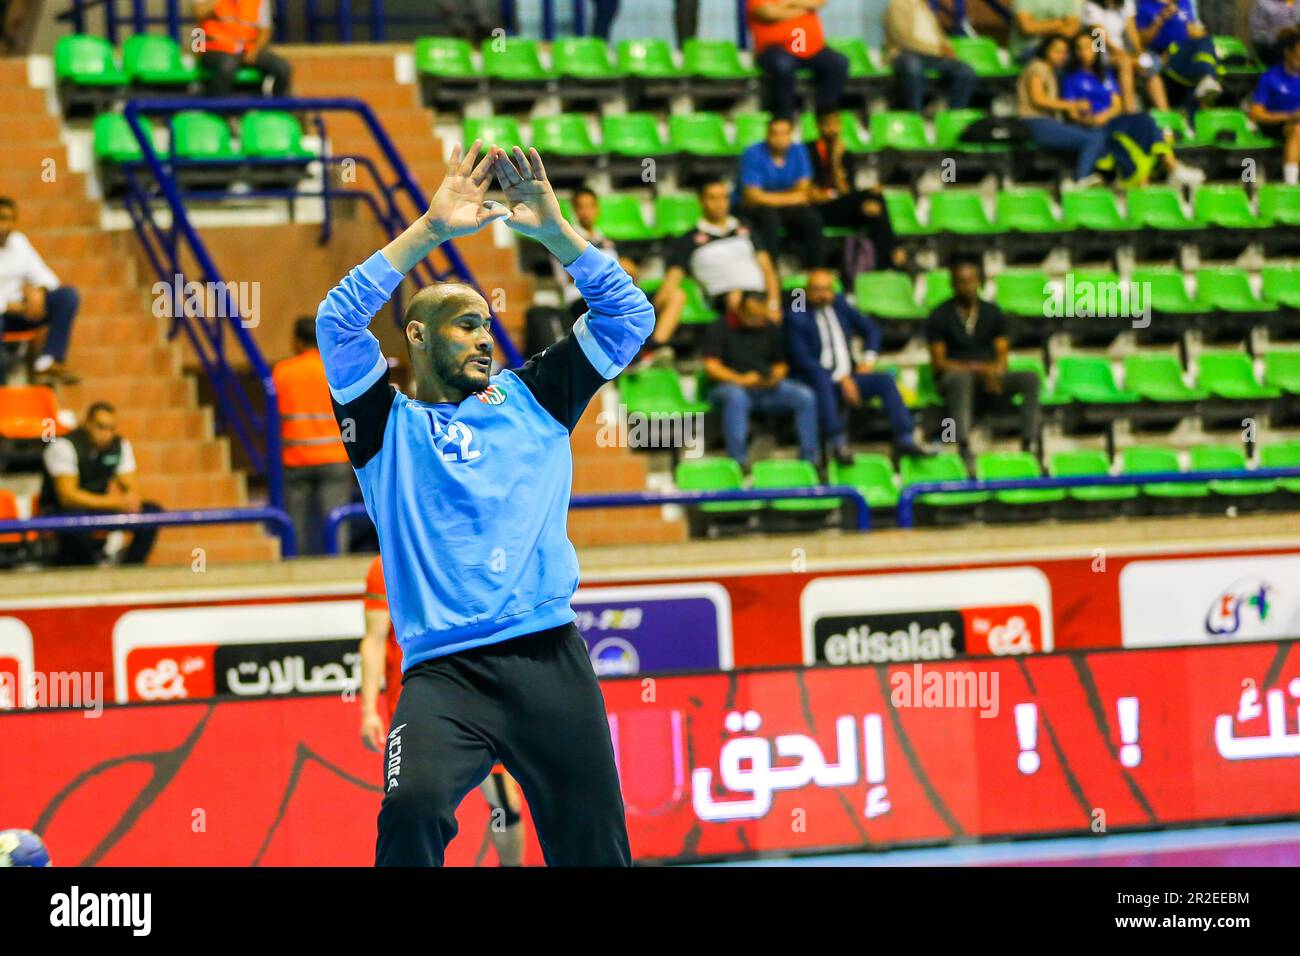 The 2023 men's African Handball confederation match between Zamalek and Sporting Club in Cairo, Egypt. Stock Photo